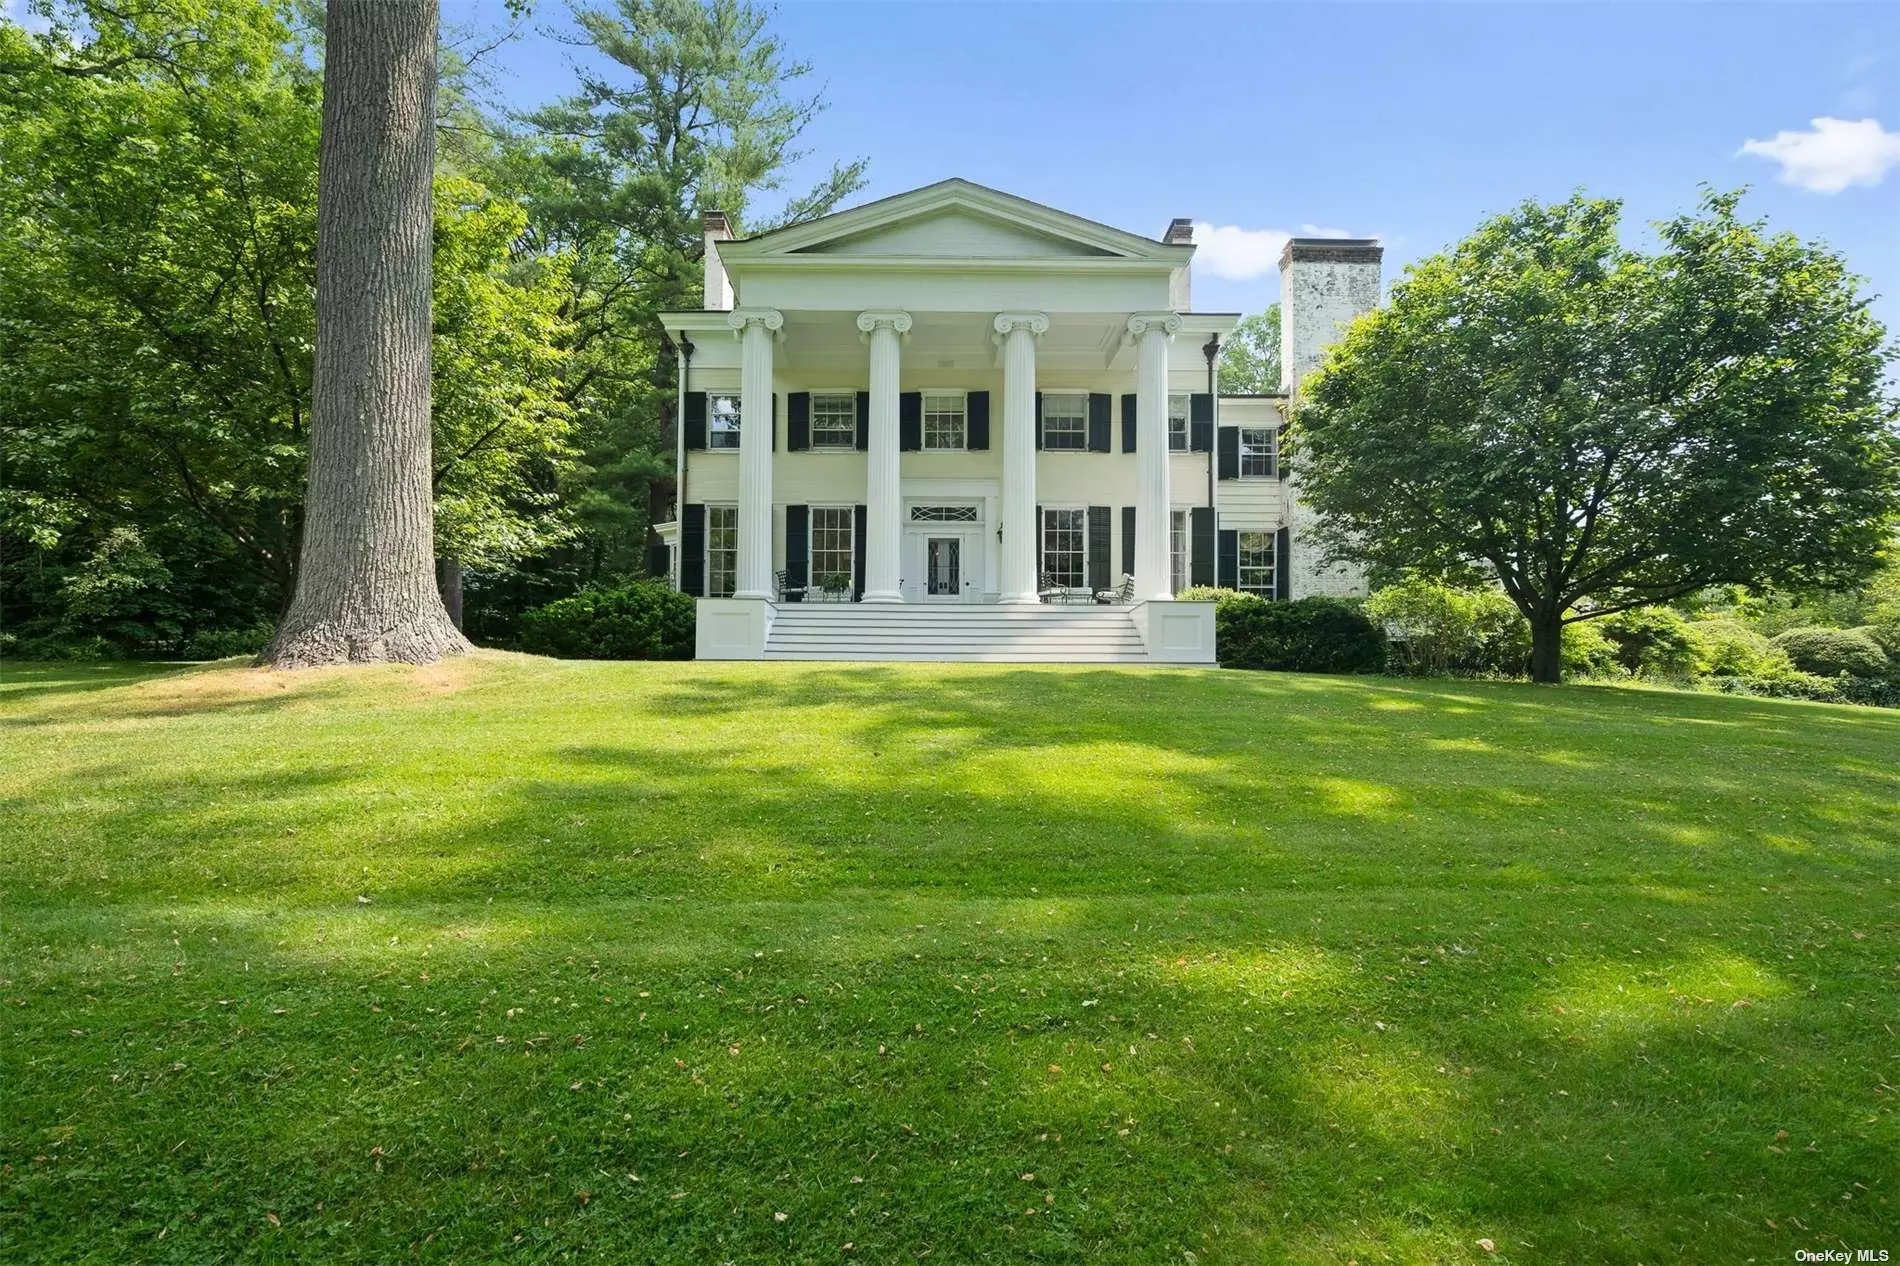 Originally built by the Youngs family as a working farm, this 5-Acre Estate has been meticulously restored by the current owners to preserve its heritage and maintain the integrity. Once owned by the son of Louis Comfort Tiffany, this 7 Bedroom Greek Revival residence has magical gardens, saltwater Pool and Pool House, Greenhouse, 2-Bedroom Cottage, Recreation Barn, Generator and Brick Coach House Garage. Surrounded by 21 Acres of conserved land, Elmwood is a rare offering. Original details include 14 ft. ceilings on 1st floor, 9 ft. on the 2nd floor, 9 fireplaces, hardwood floors, and architectural elements including elegant moldings, interior shutters, built-ins, hardware and window seats. Steeped in history, with only 4 owners, this estate embodies an idyllic lifestyle with modern updates minutes from all that the quaint village of Oyster Bay offers.